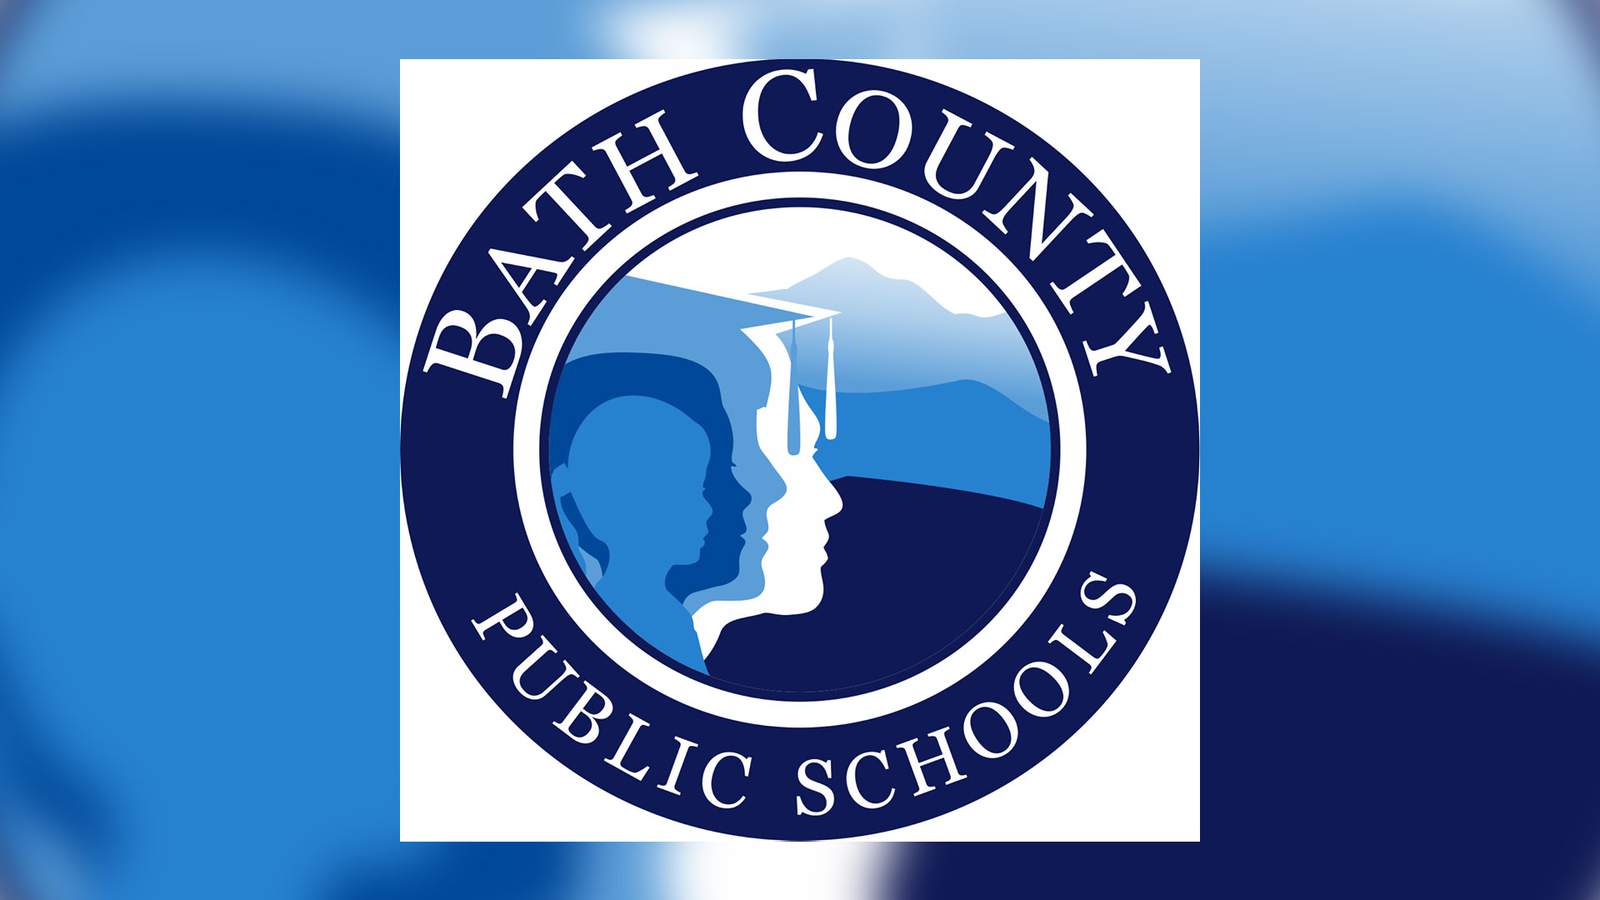 Bath County closing schools for rest of week due to sickness